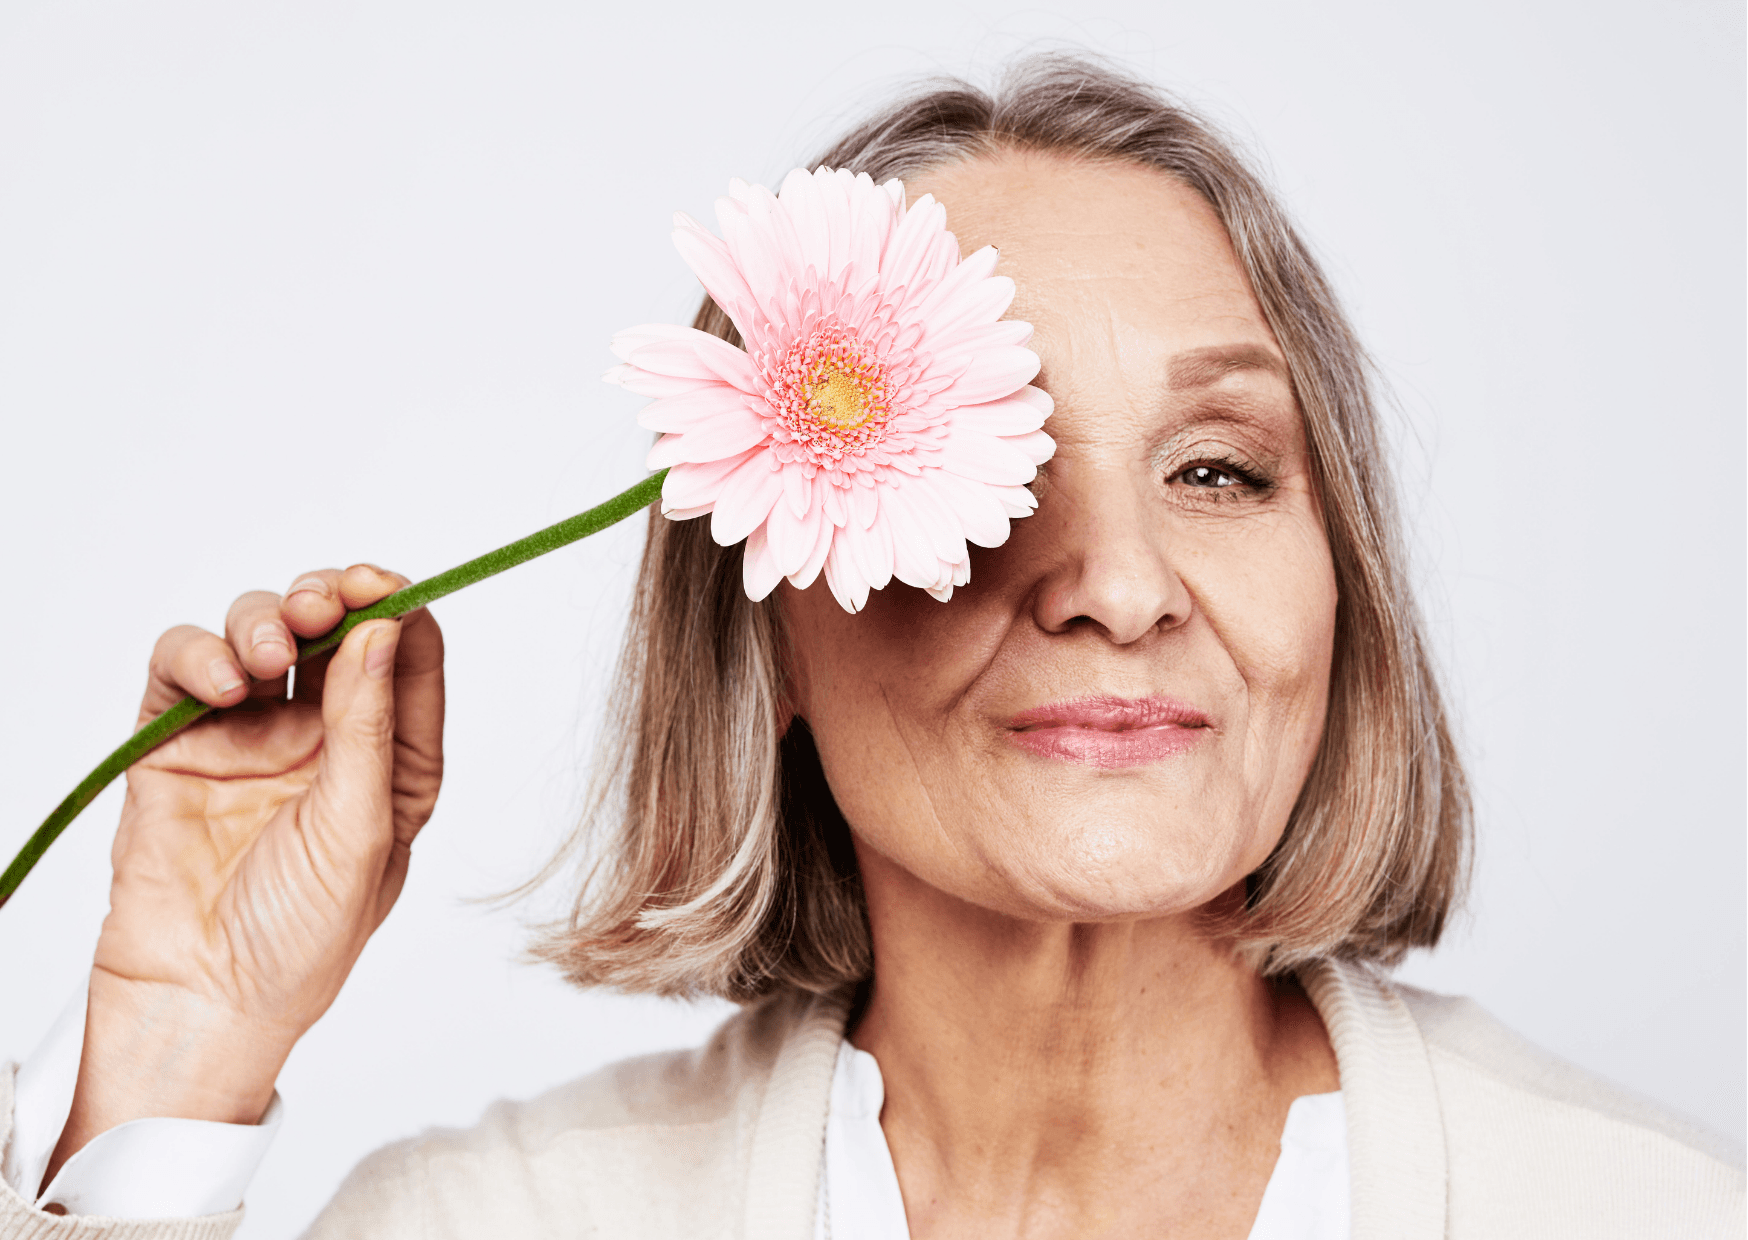 World Menopause Day - What is It and Ways to Ease Menopause Symptoms